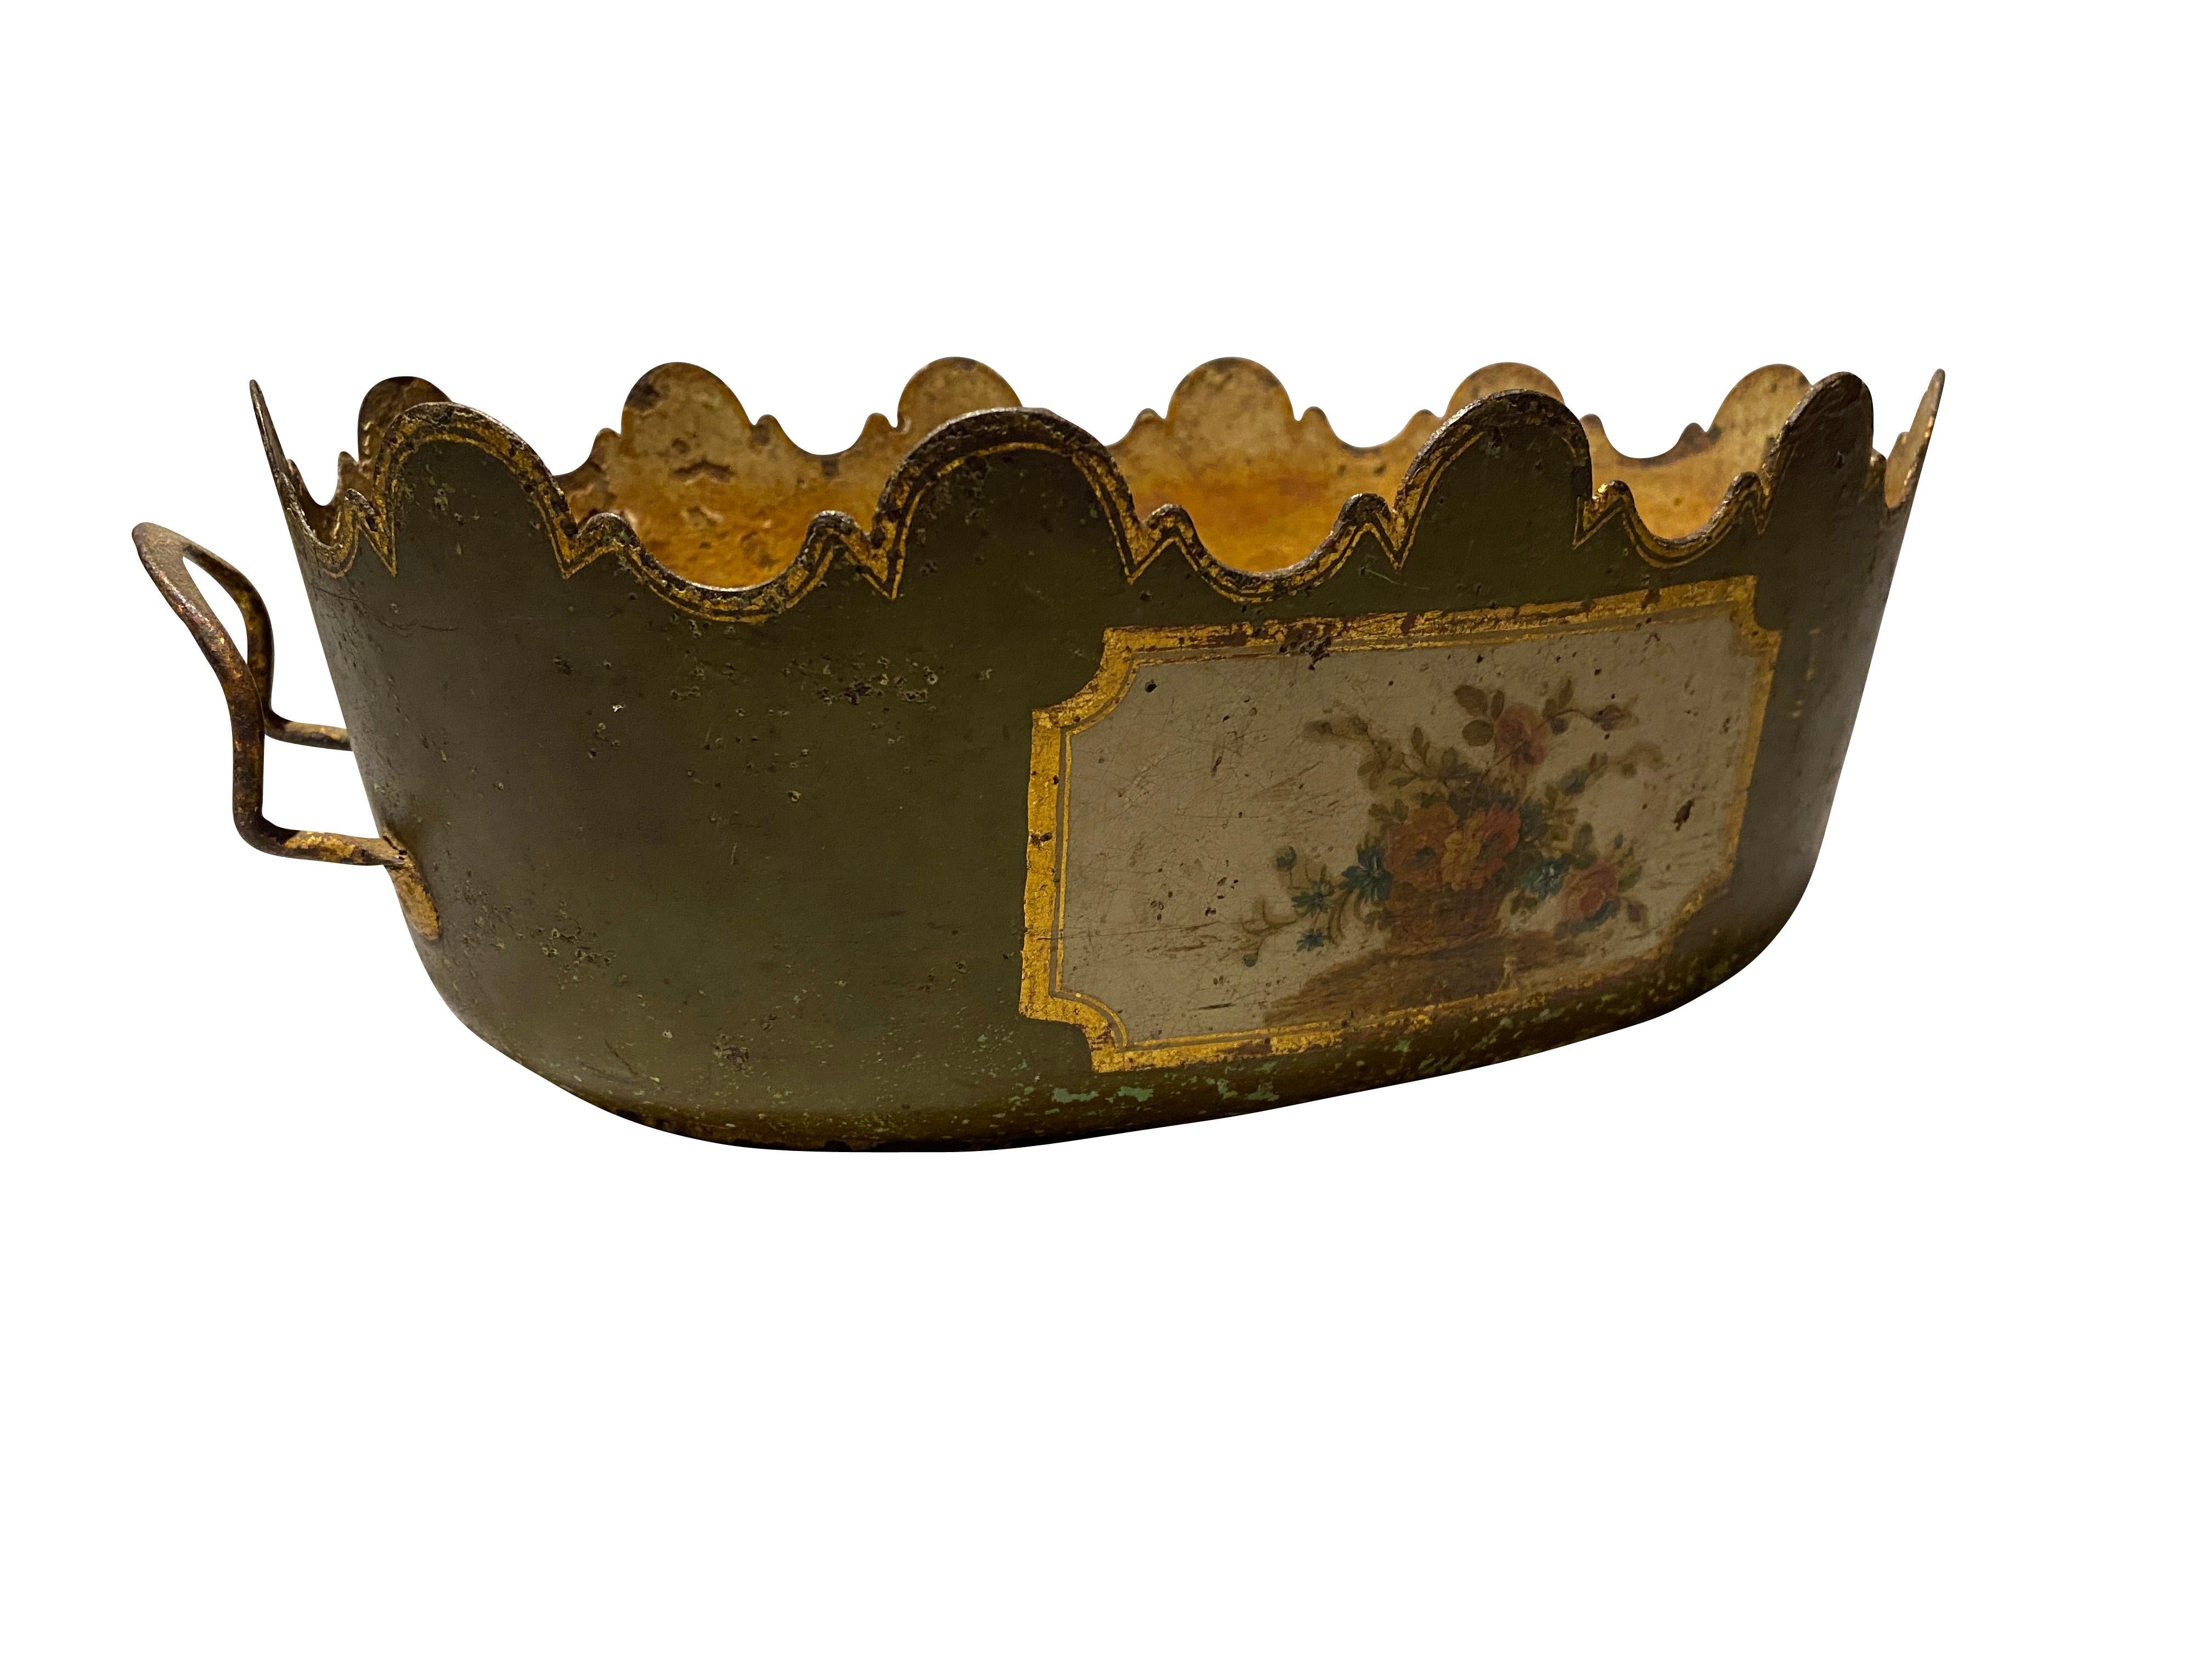 Oval with handles and a pale green with central panel of a floral still life. Serrated edge with overall gilded details.